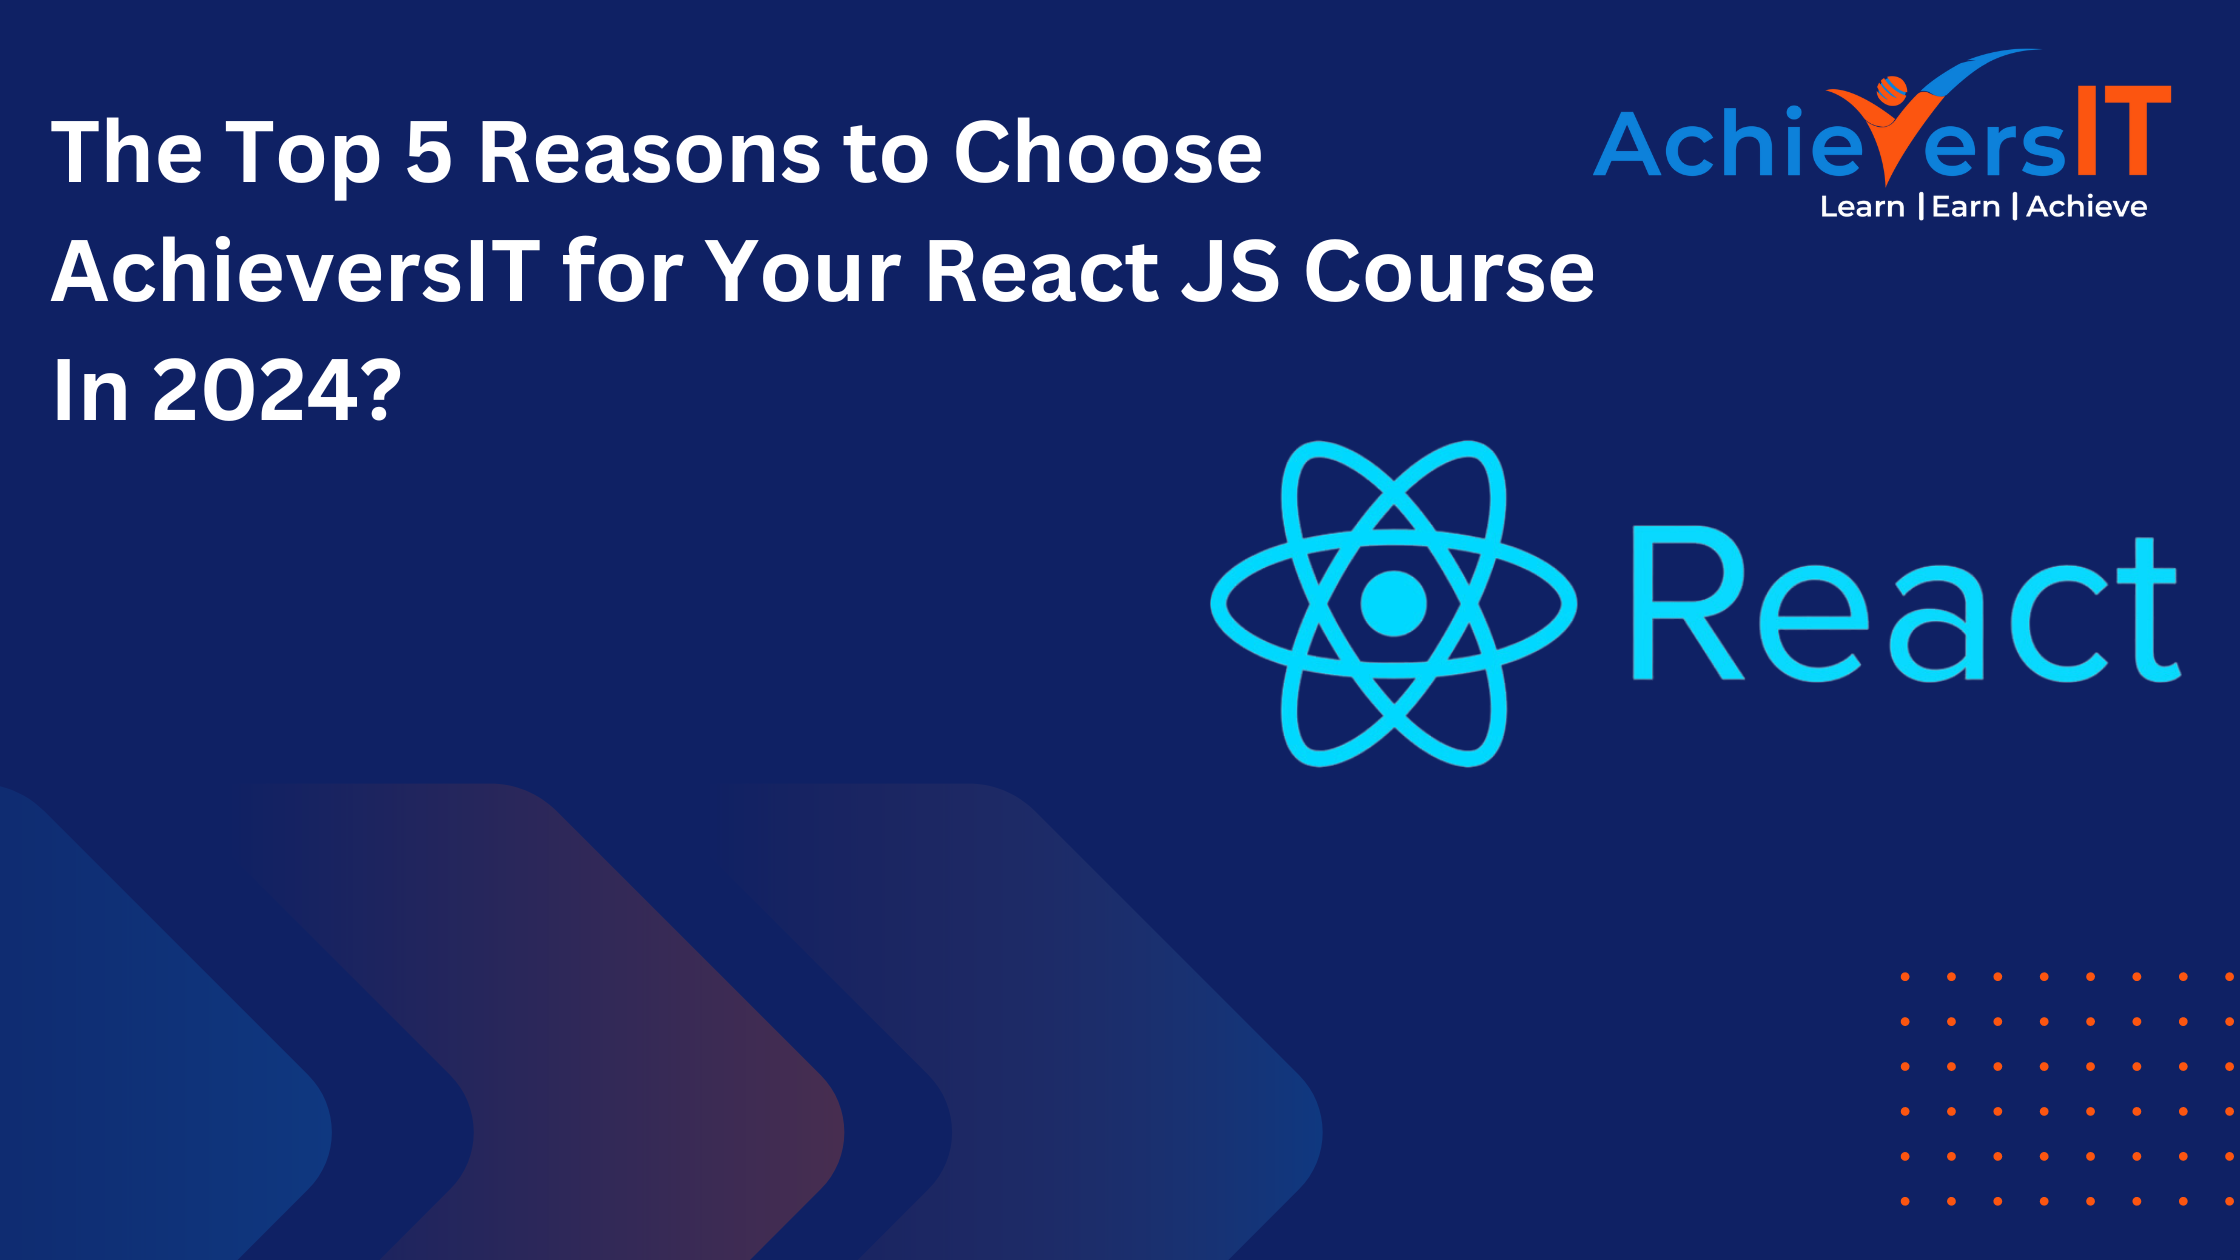 The Top 5 Reasons to Choose AchieversIT for Your React JS Course In 2024